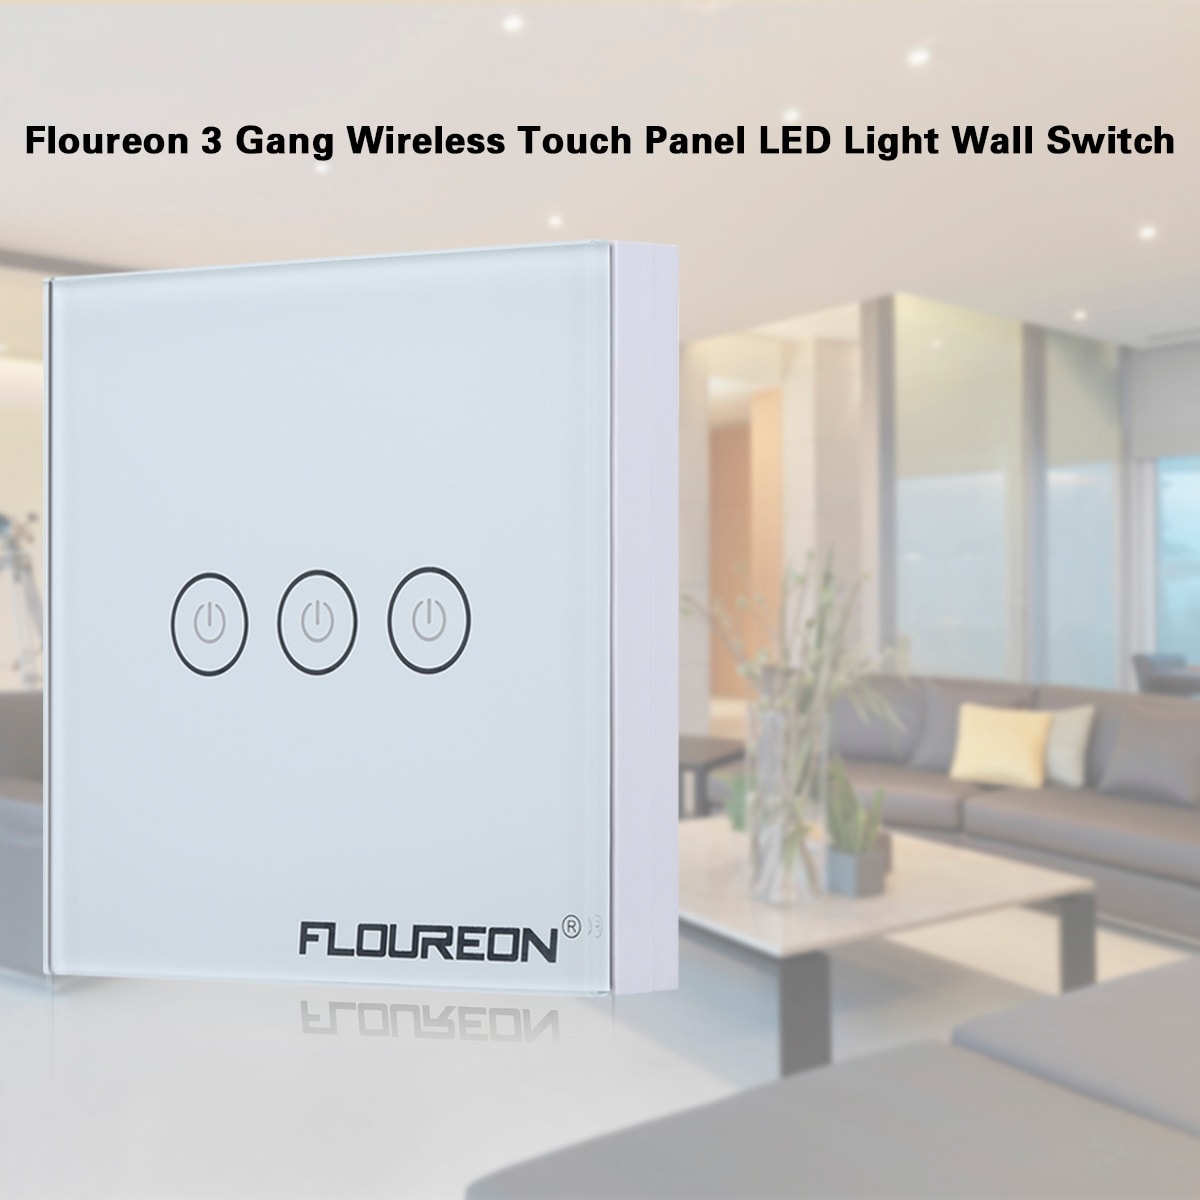 https://ak1.ostkcdn.com/images/products/is/images/direct/9690b333b4de12c4104ba8b90e578af4b3b880c0/Floureon-3-Gang-1-Way-Wireless-RF-Remote-Control-Light-Switch-433.92MHz-Remote-Controller-Portable-Switch.jpg